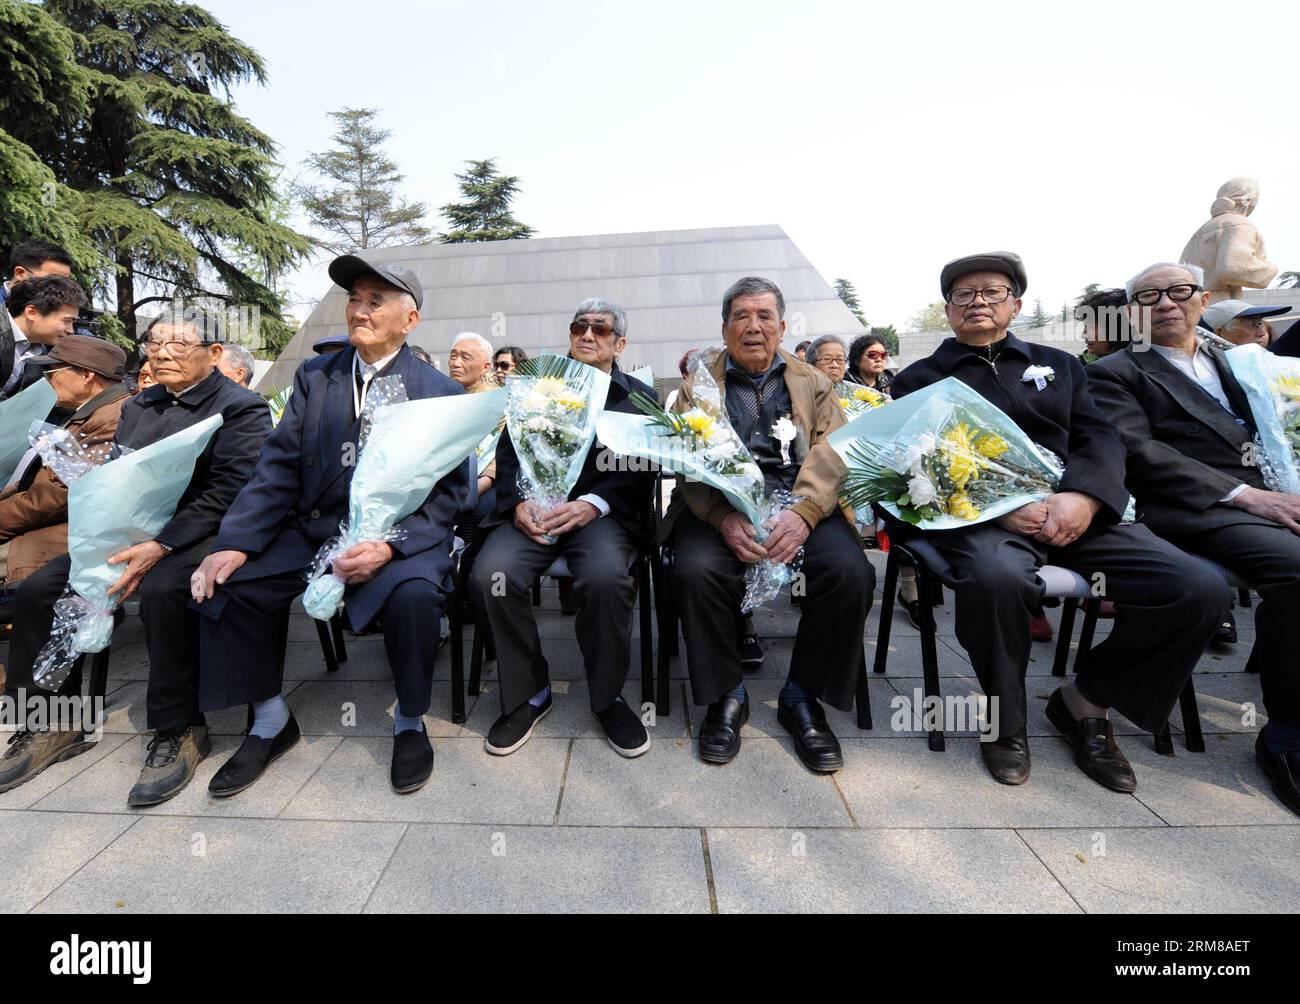 (140405) -- NANJING, April 5, 2014 (Xinhua) -- Survivors and family members of the victims of the Nanjing Massacre in 1937 attend a memorial ceremony in the Memorial Hall of the Victims in Nanjing Massacre by Japanese Invaders, in Nanjing, capital of east China s Jiangsu Province, April 5, 2014, also the Qingming Festival, or the Tomb-Sweeping Day. Lots of citizens came here to mourn Nanjing Massacre victims on Saturday. (Xinhua/Sun Can) (wf) CHINA-NANJING-QINGMING FESTIVAL-NANJING MASSACRE-MEMORIAL CEREMONY (CN) PUBLICATIONxNOTxINxCHN   Nanjing April 5 2014 XINHUA Survivors and Family Members Stock Photo